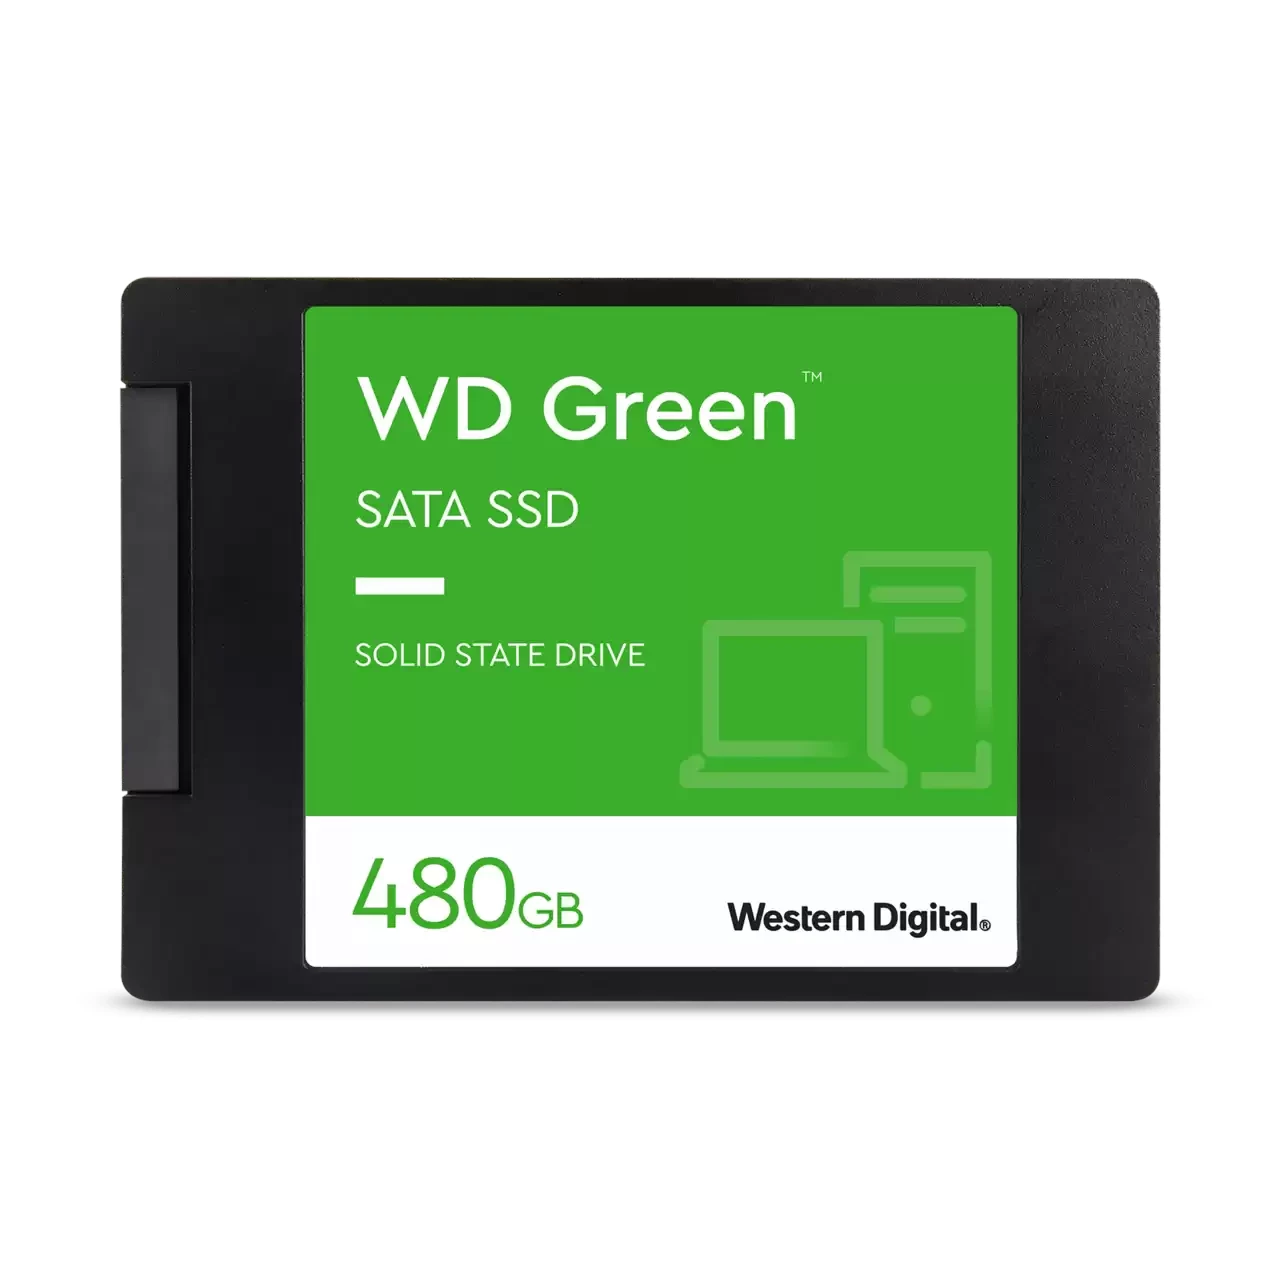 WD Green-NAND 480Gb 2.5吋 SSD 固態硬碟  #WDs480g3g0A